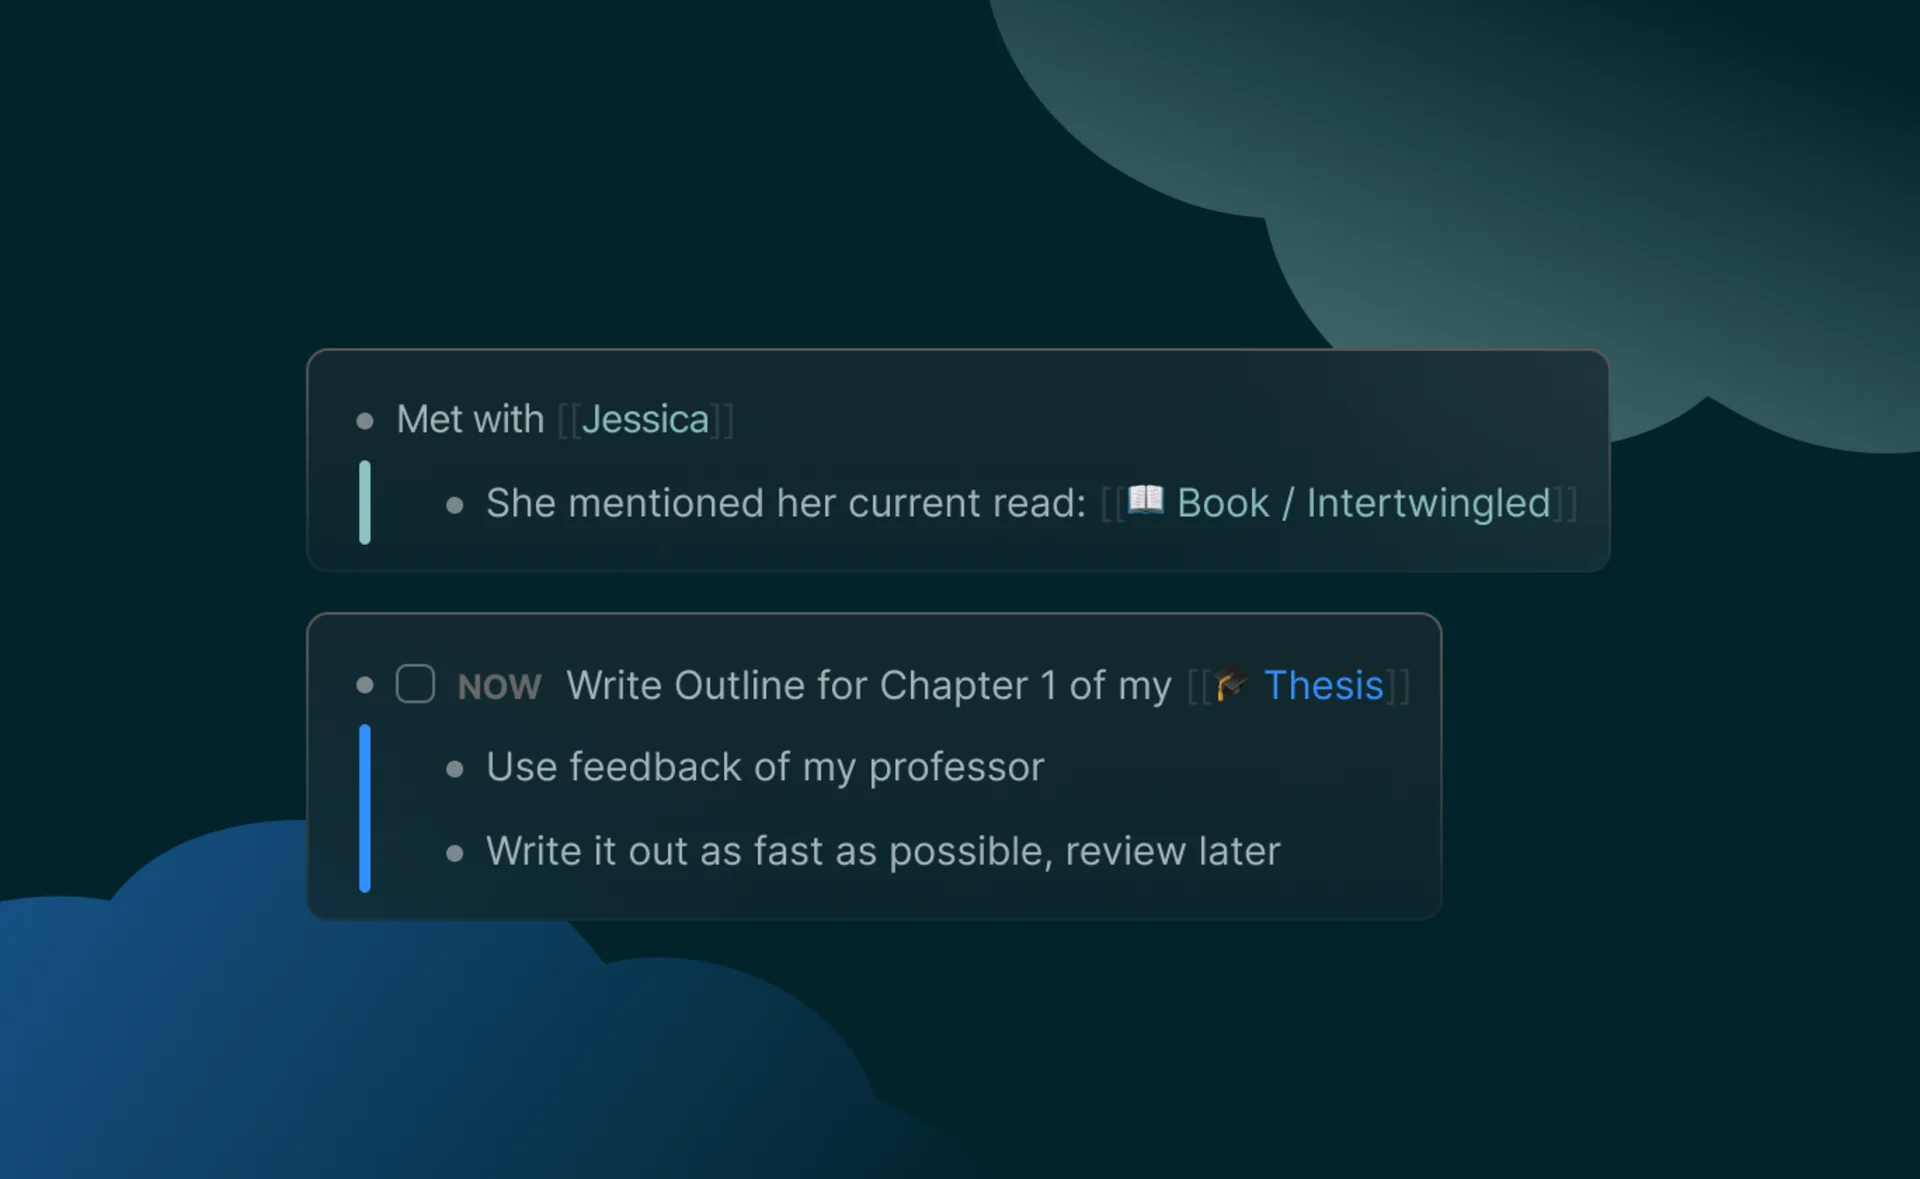 Logseq, Note Open with "Met with Jessica" and thesis note, App